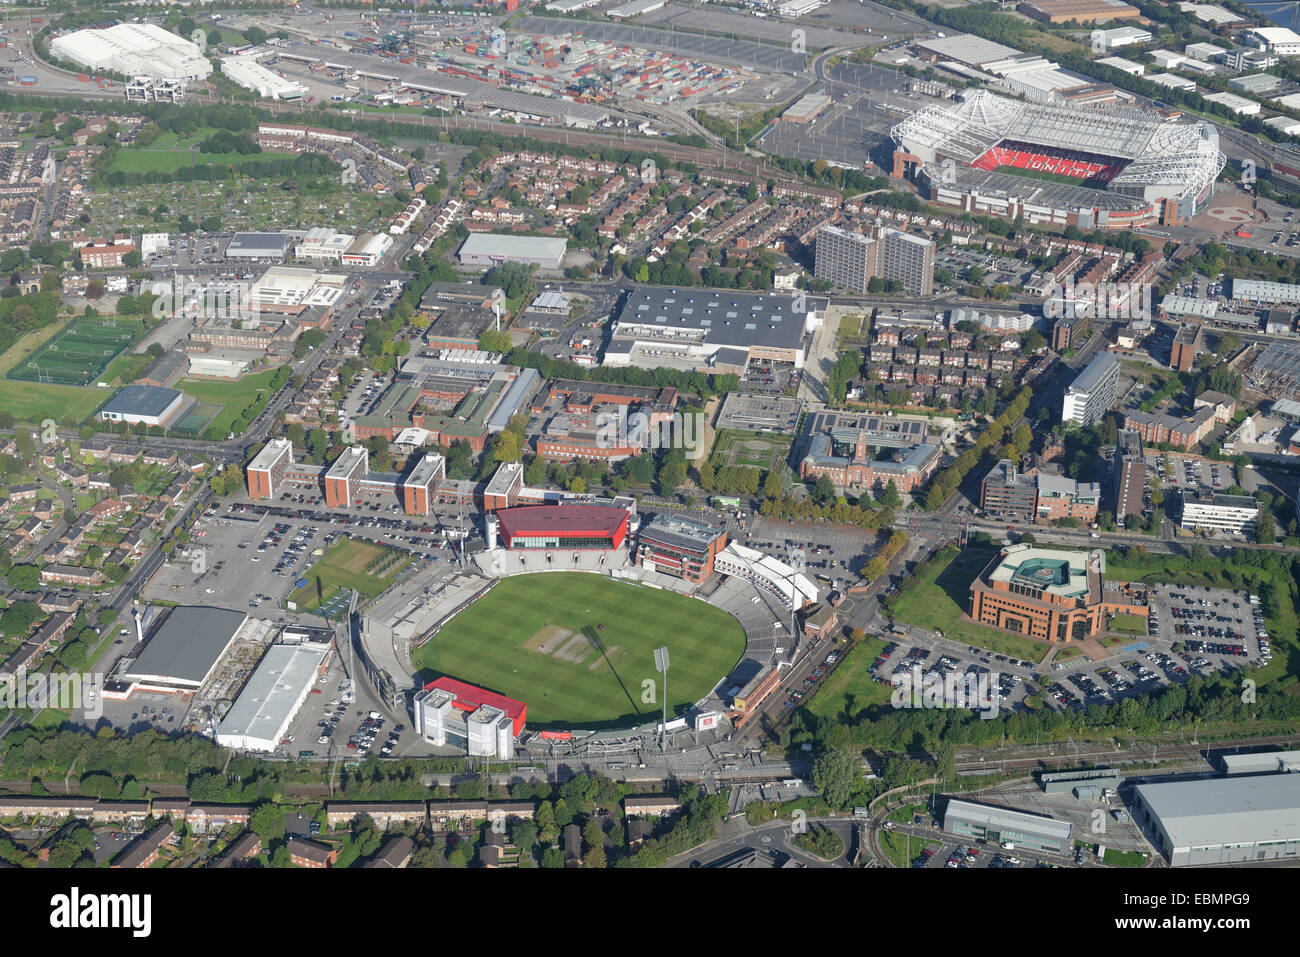 an-aerial-view-of-the-old-trafford-and-t